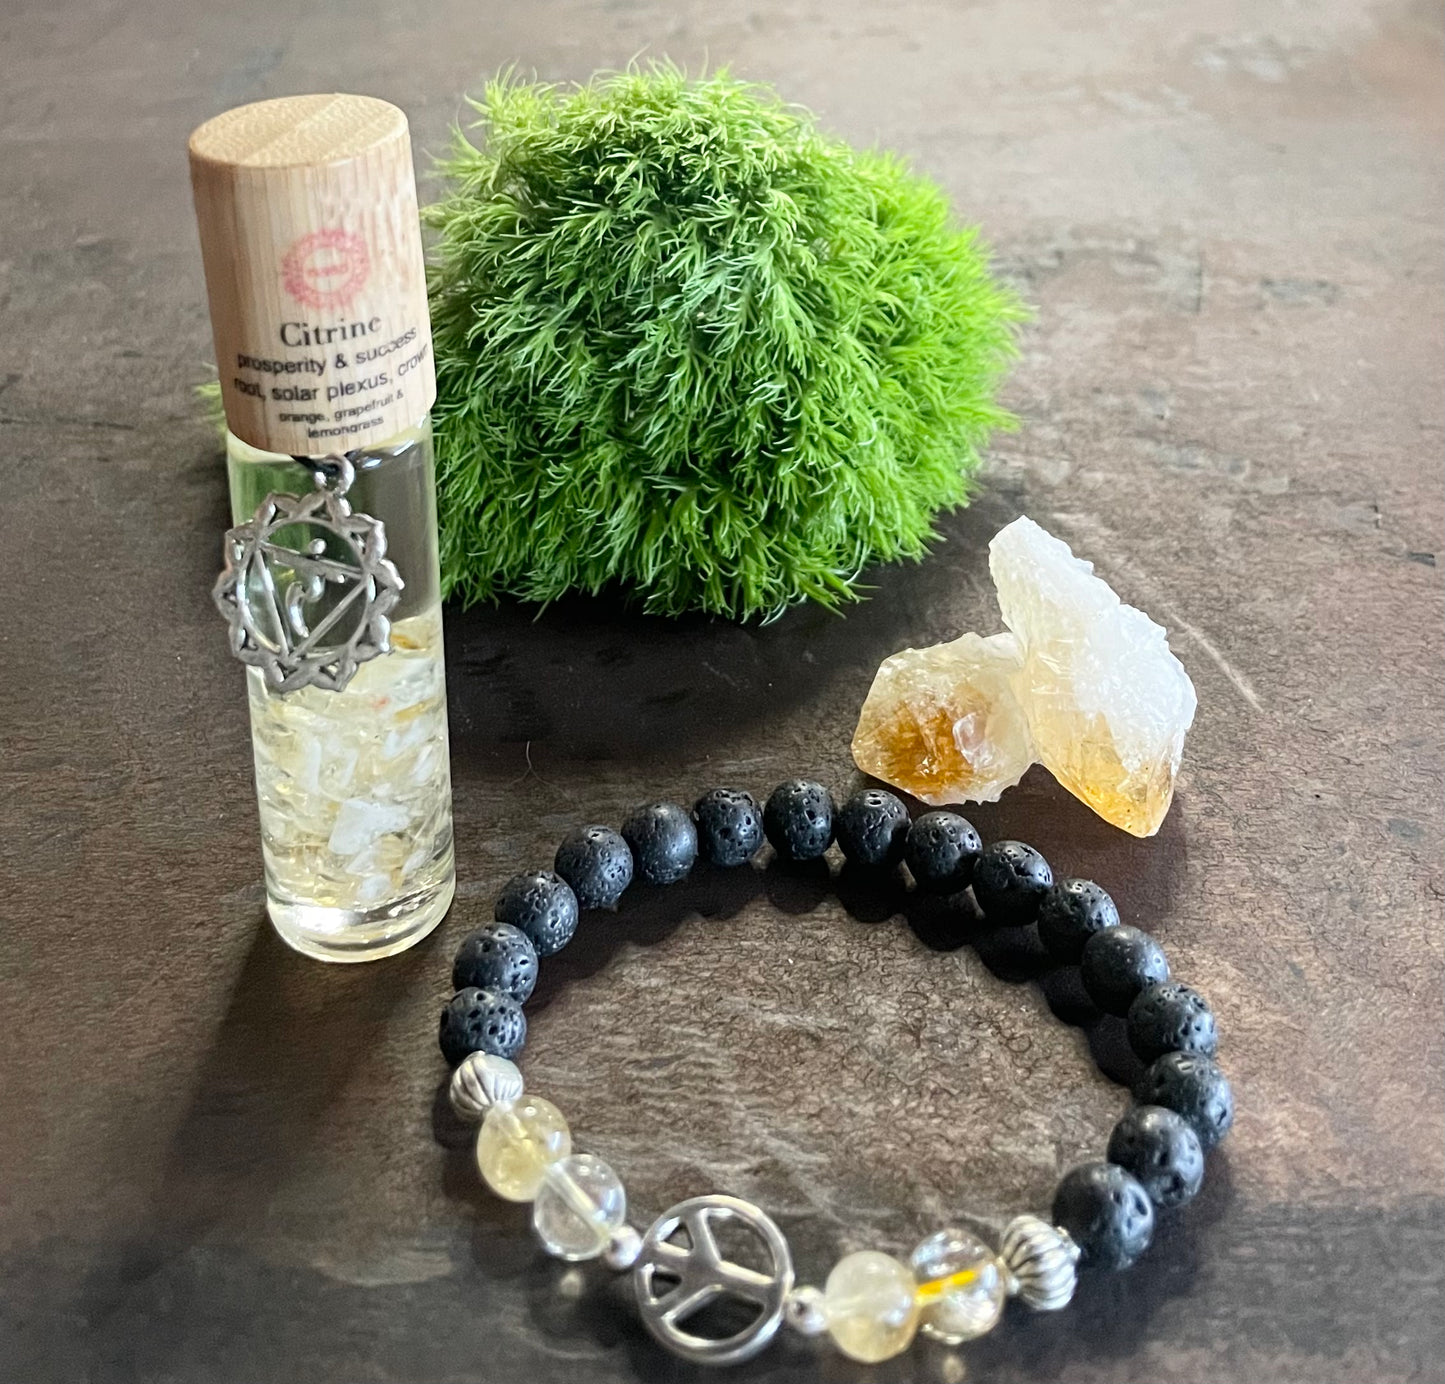 Citrine Gemstone Roll-on with Citrine Essential Oil Diffusing Bracelet